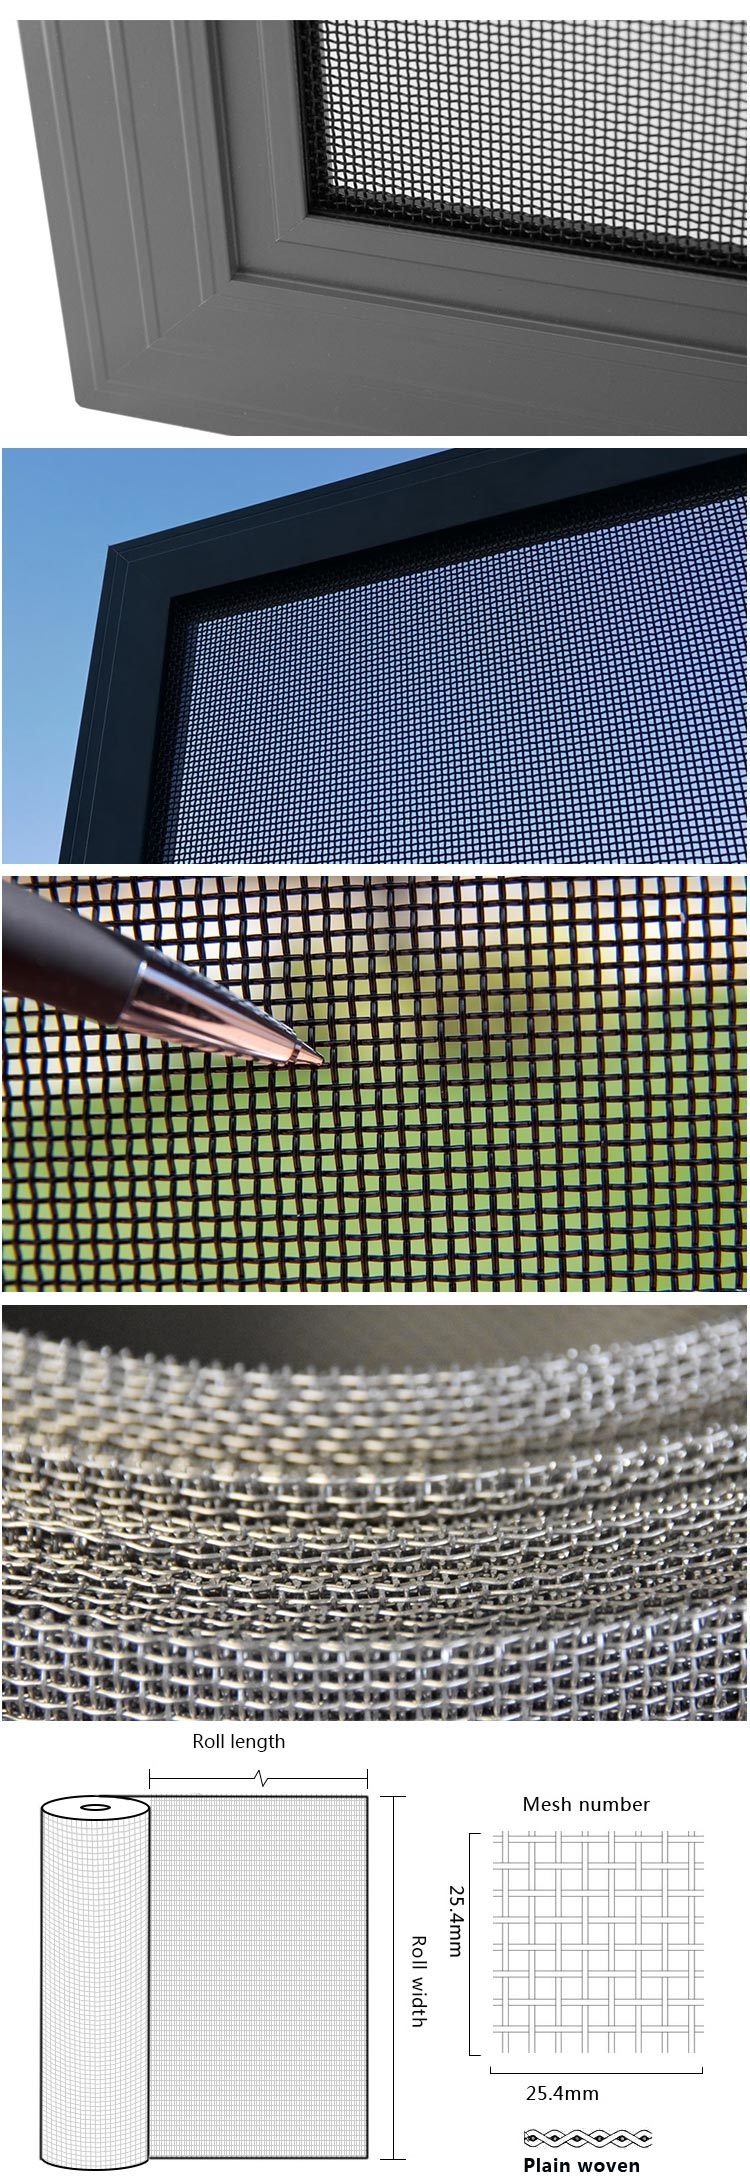 Explosion Proof and Bulletproof SS304 Stainless Steel Window Wire Mesh